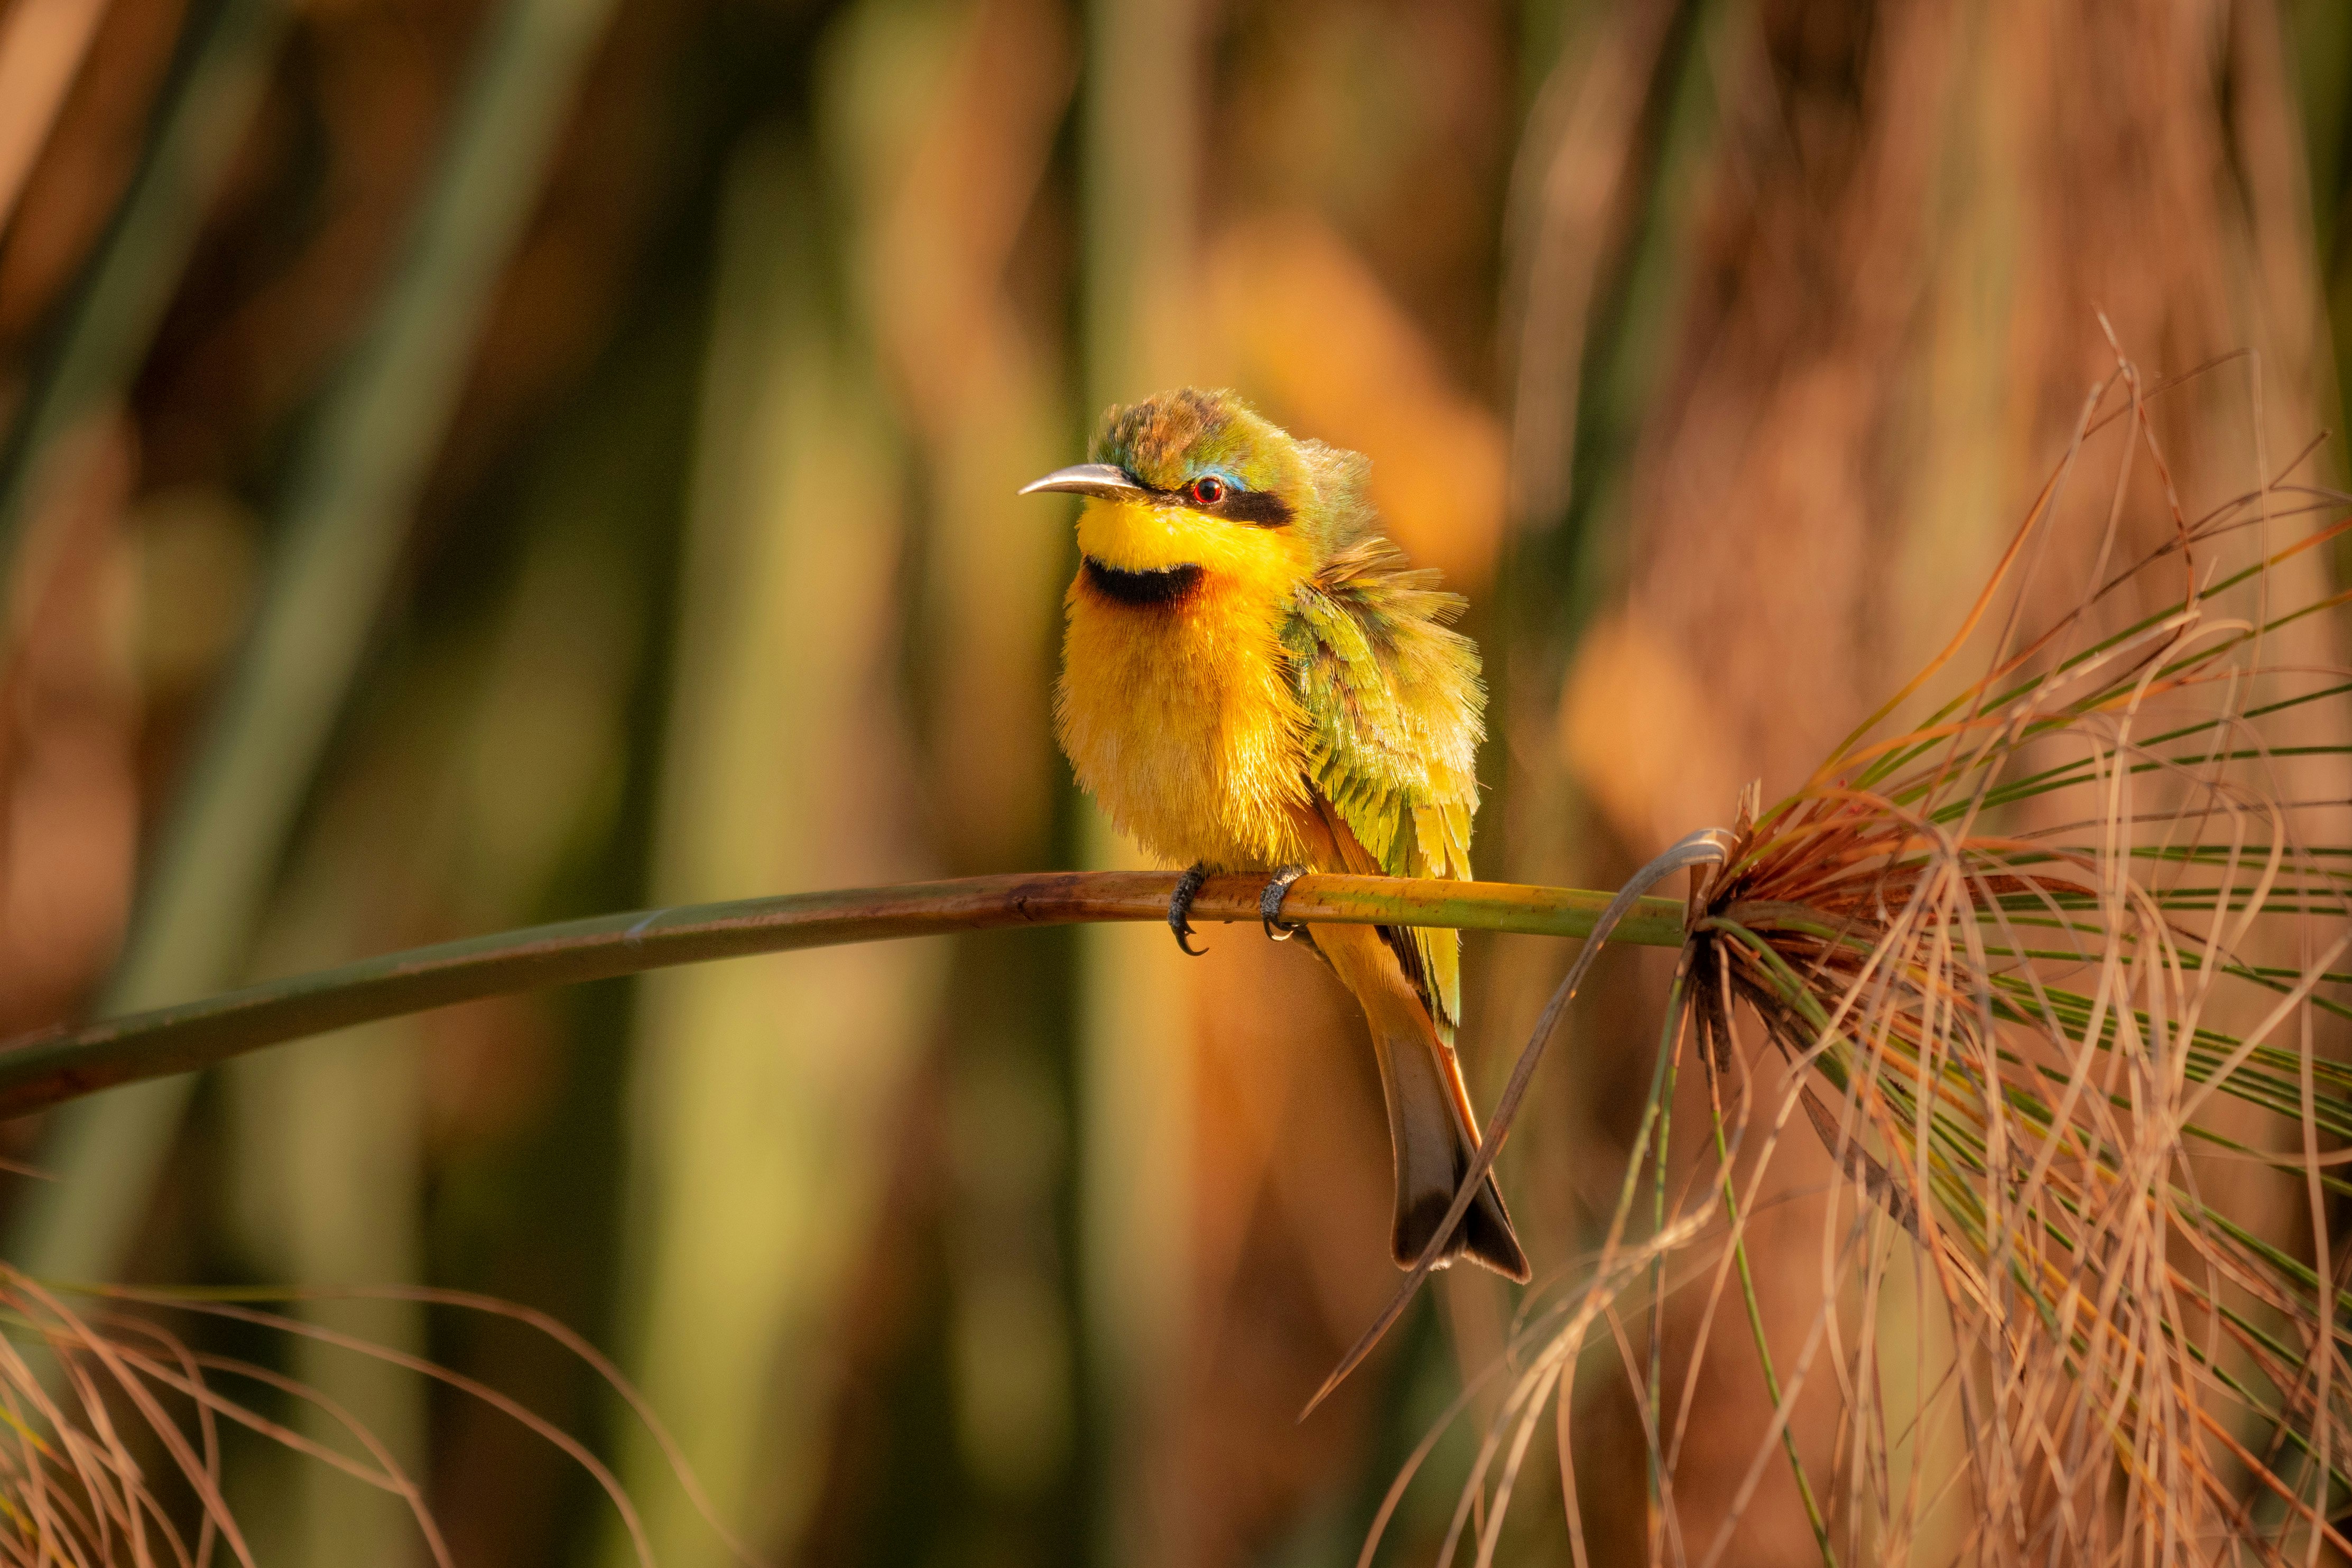 green and yellow bird on brown tree branch during daytime